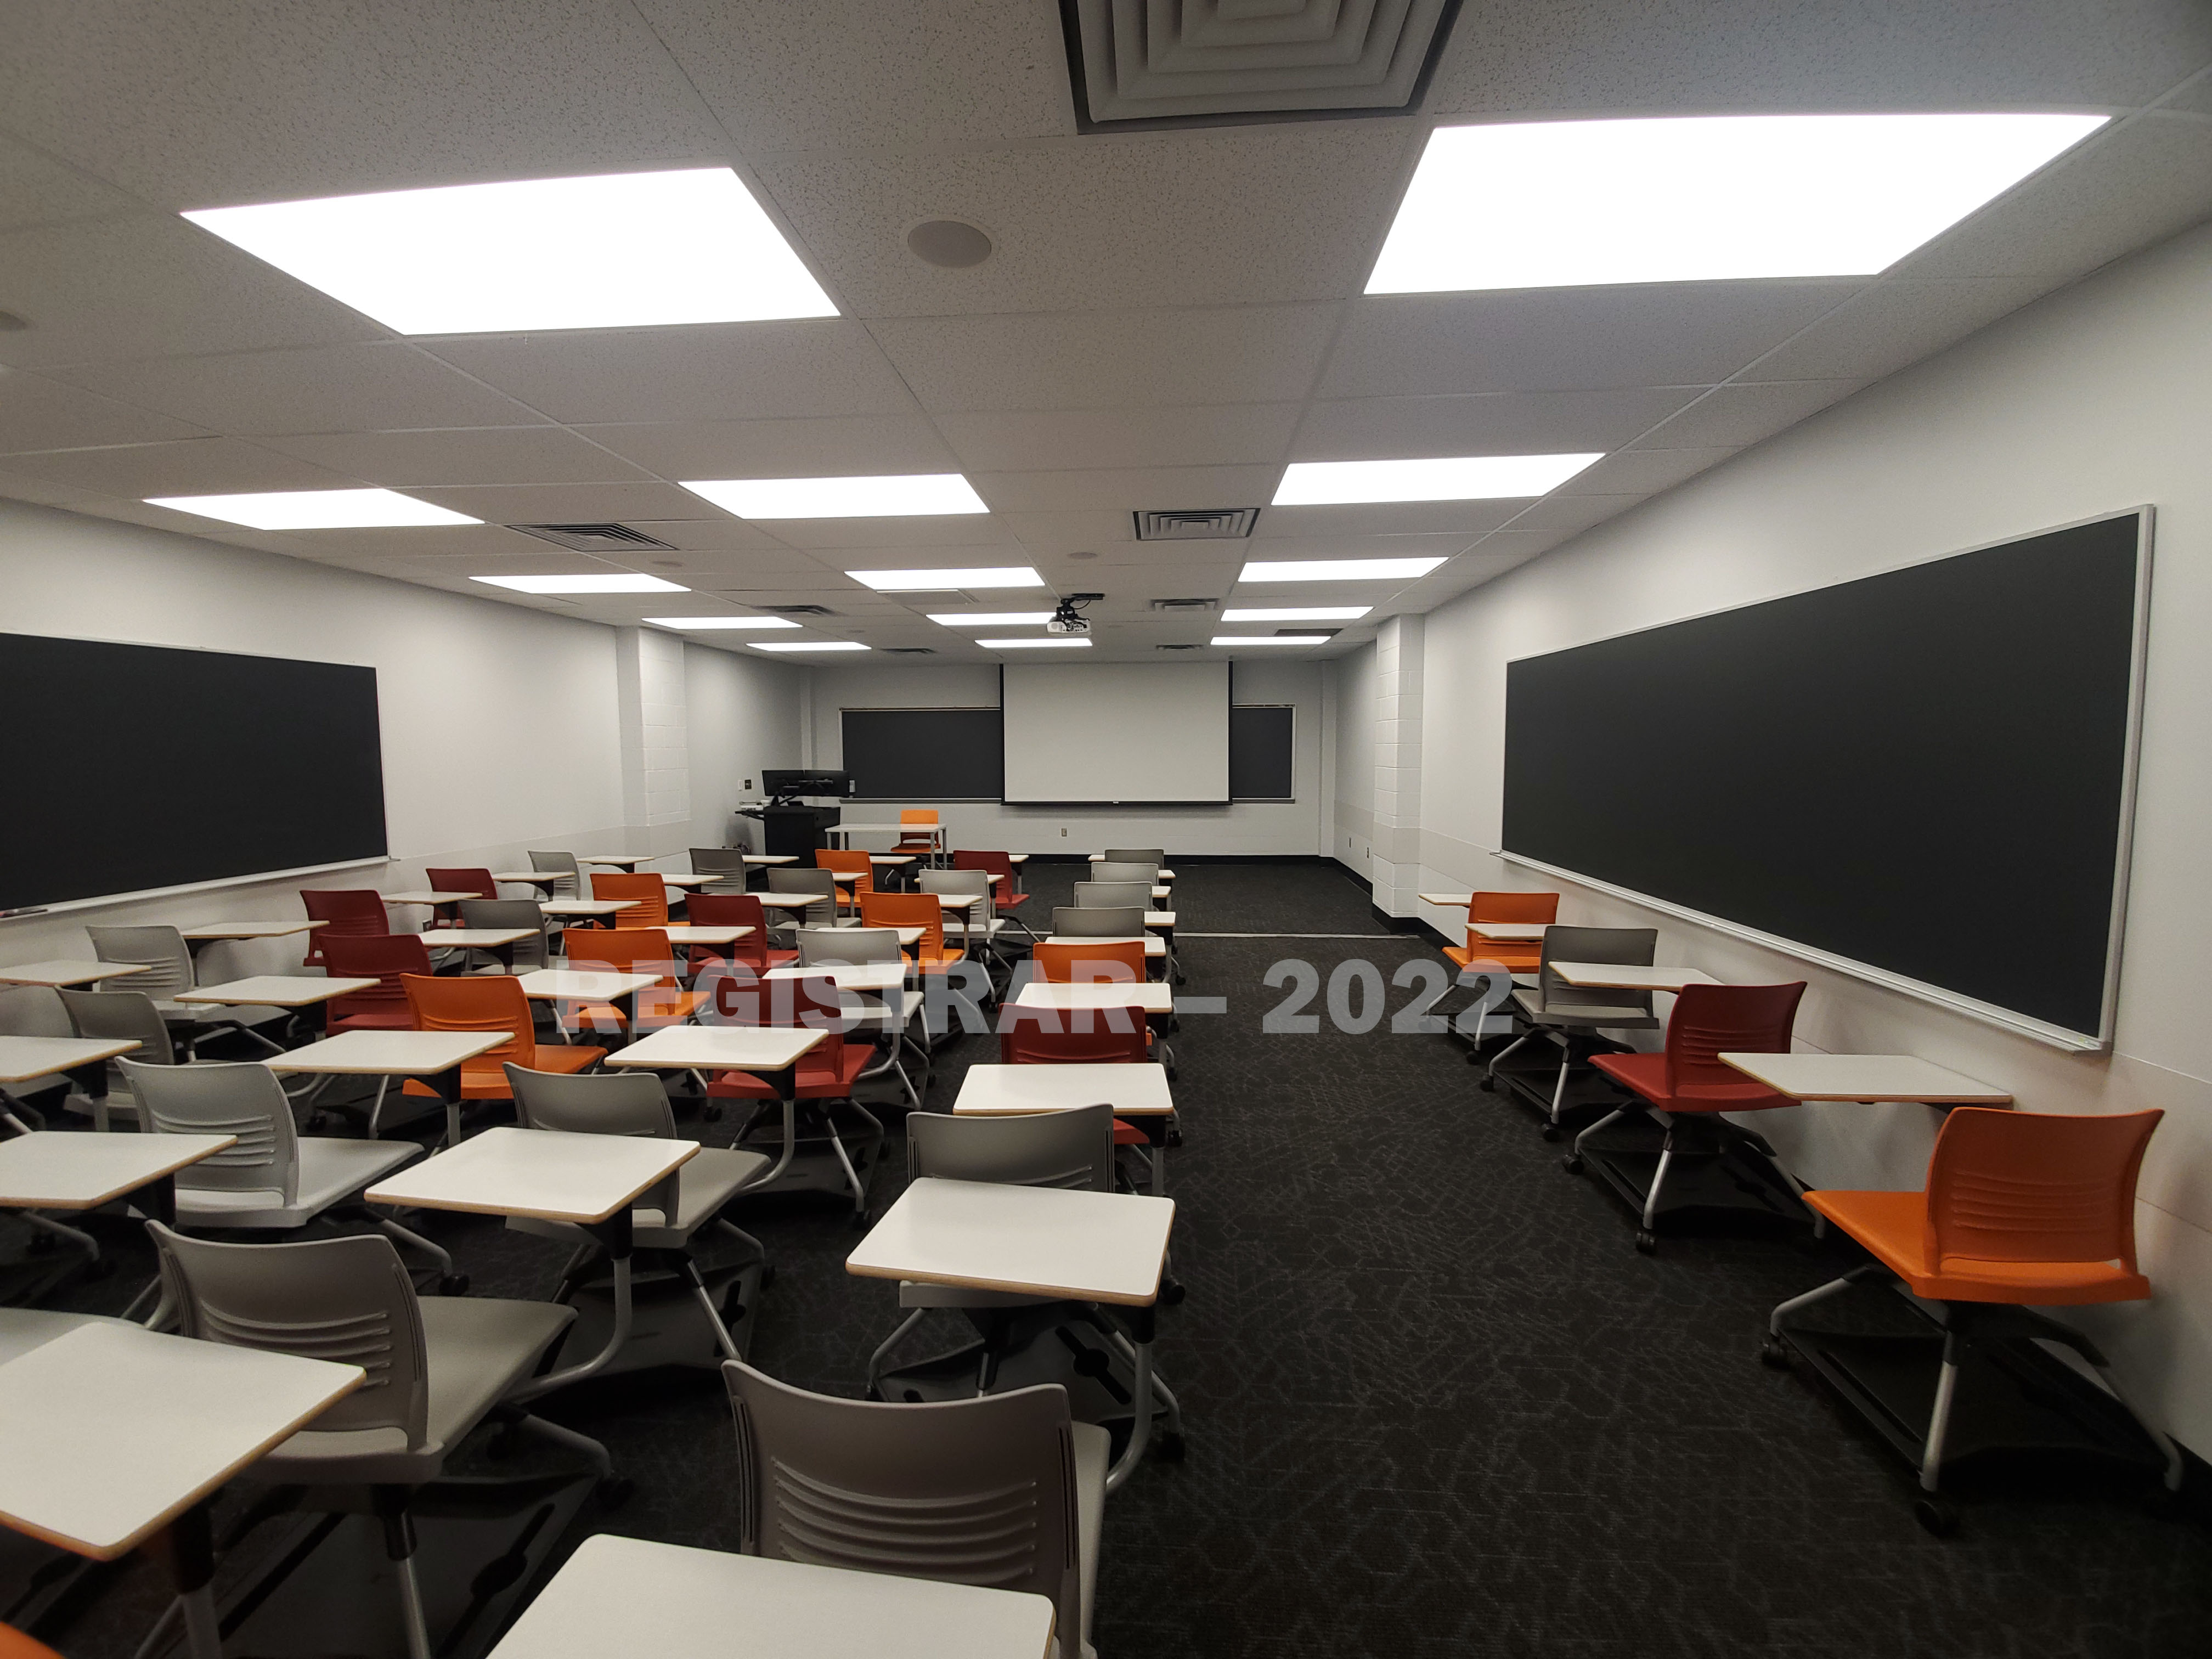 Journalism Building room 371 ultra wide angle view from the back of the room with projector screen down